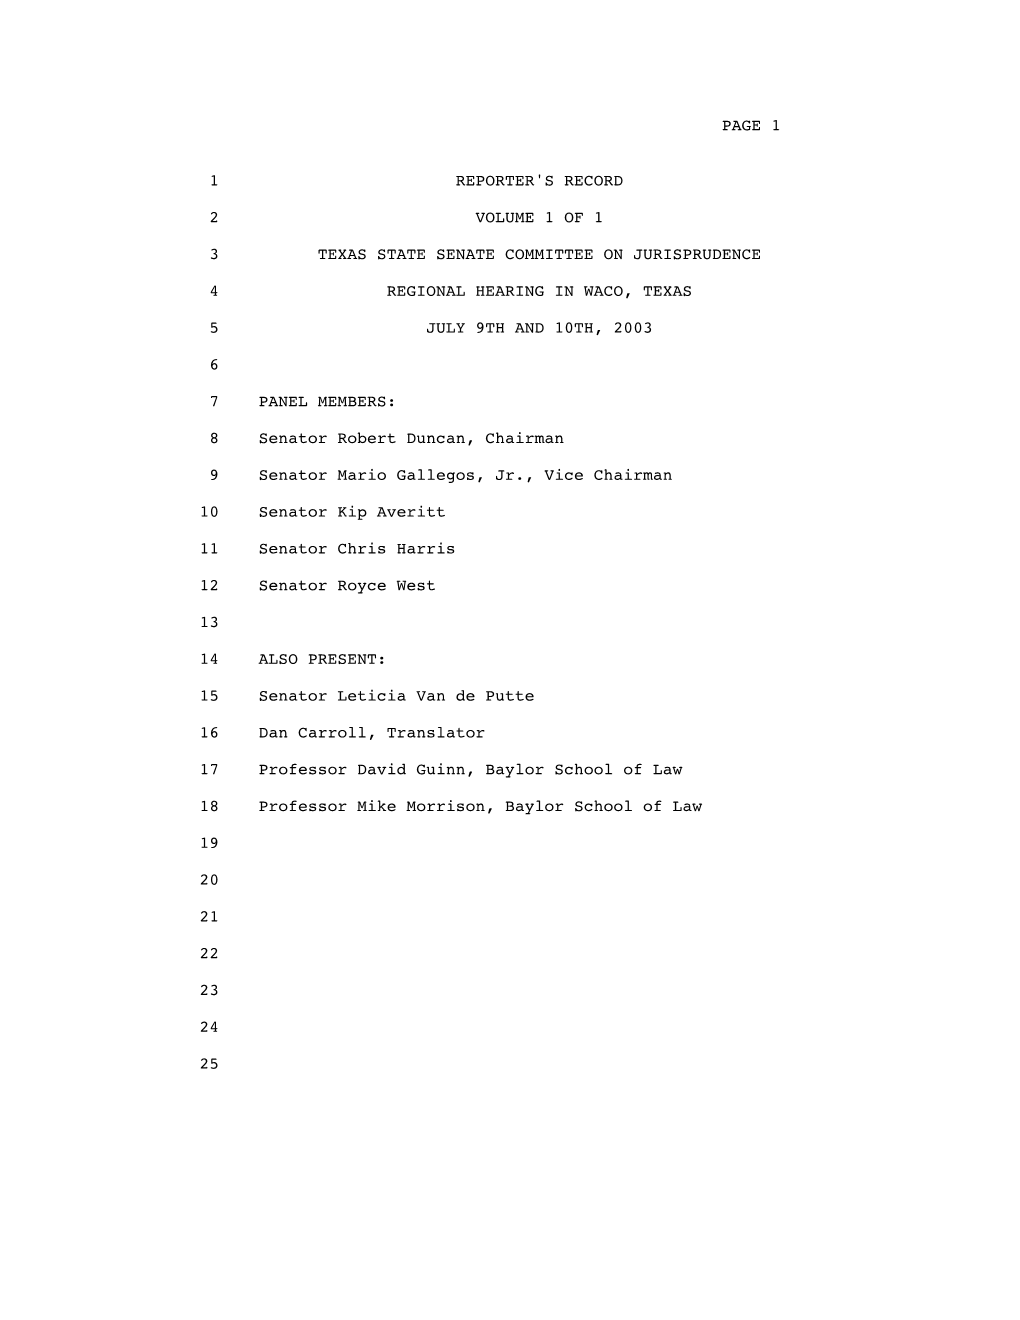 Page 1 1 Reporter's Record 2 Volume 1 of 1 3 Texas State Senate Committee on Jurisprudence 4 Regional Hearing In